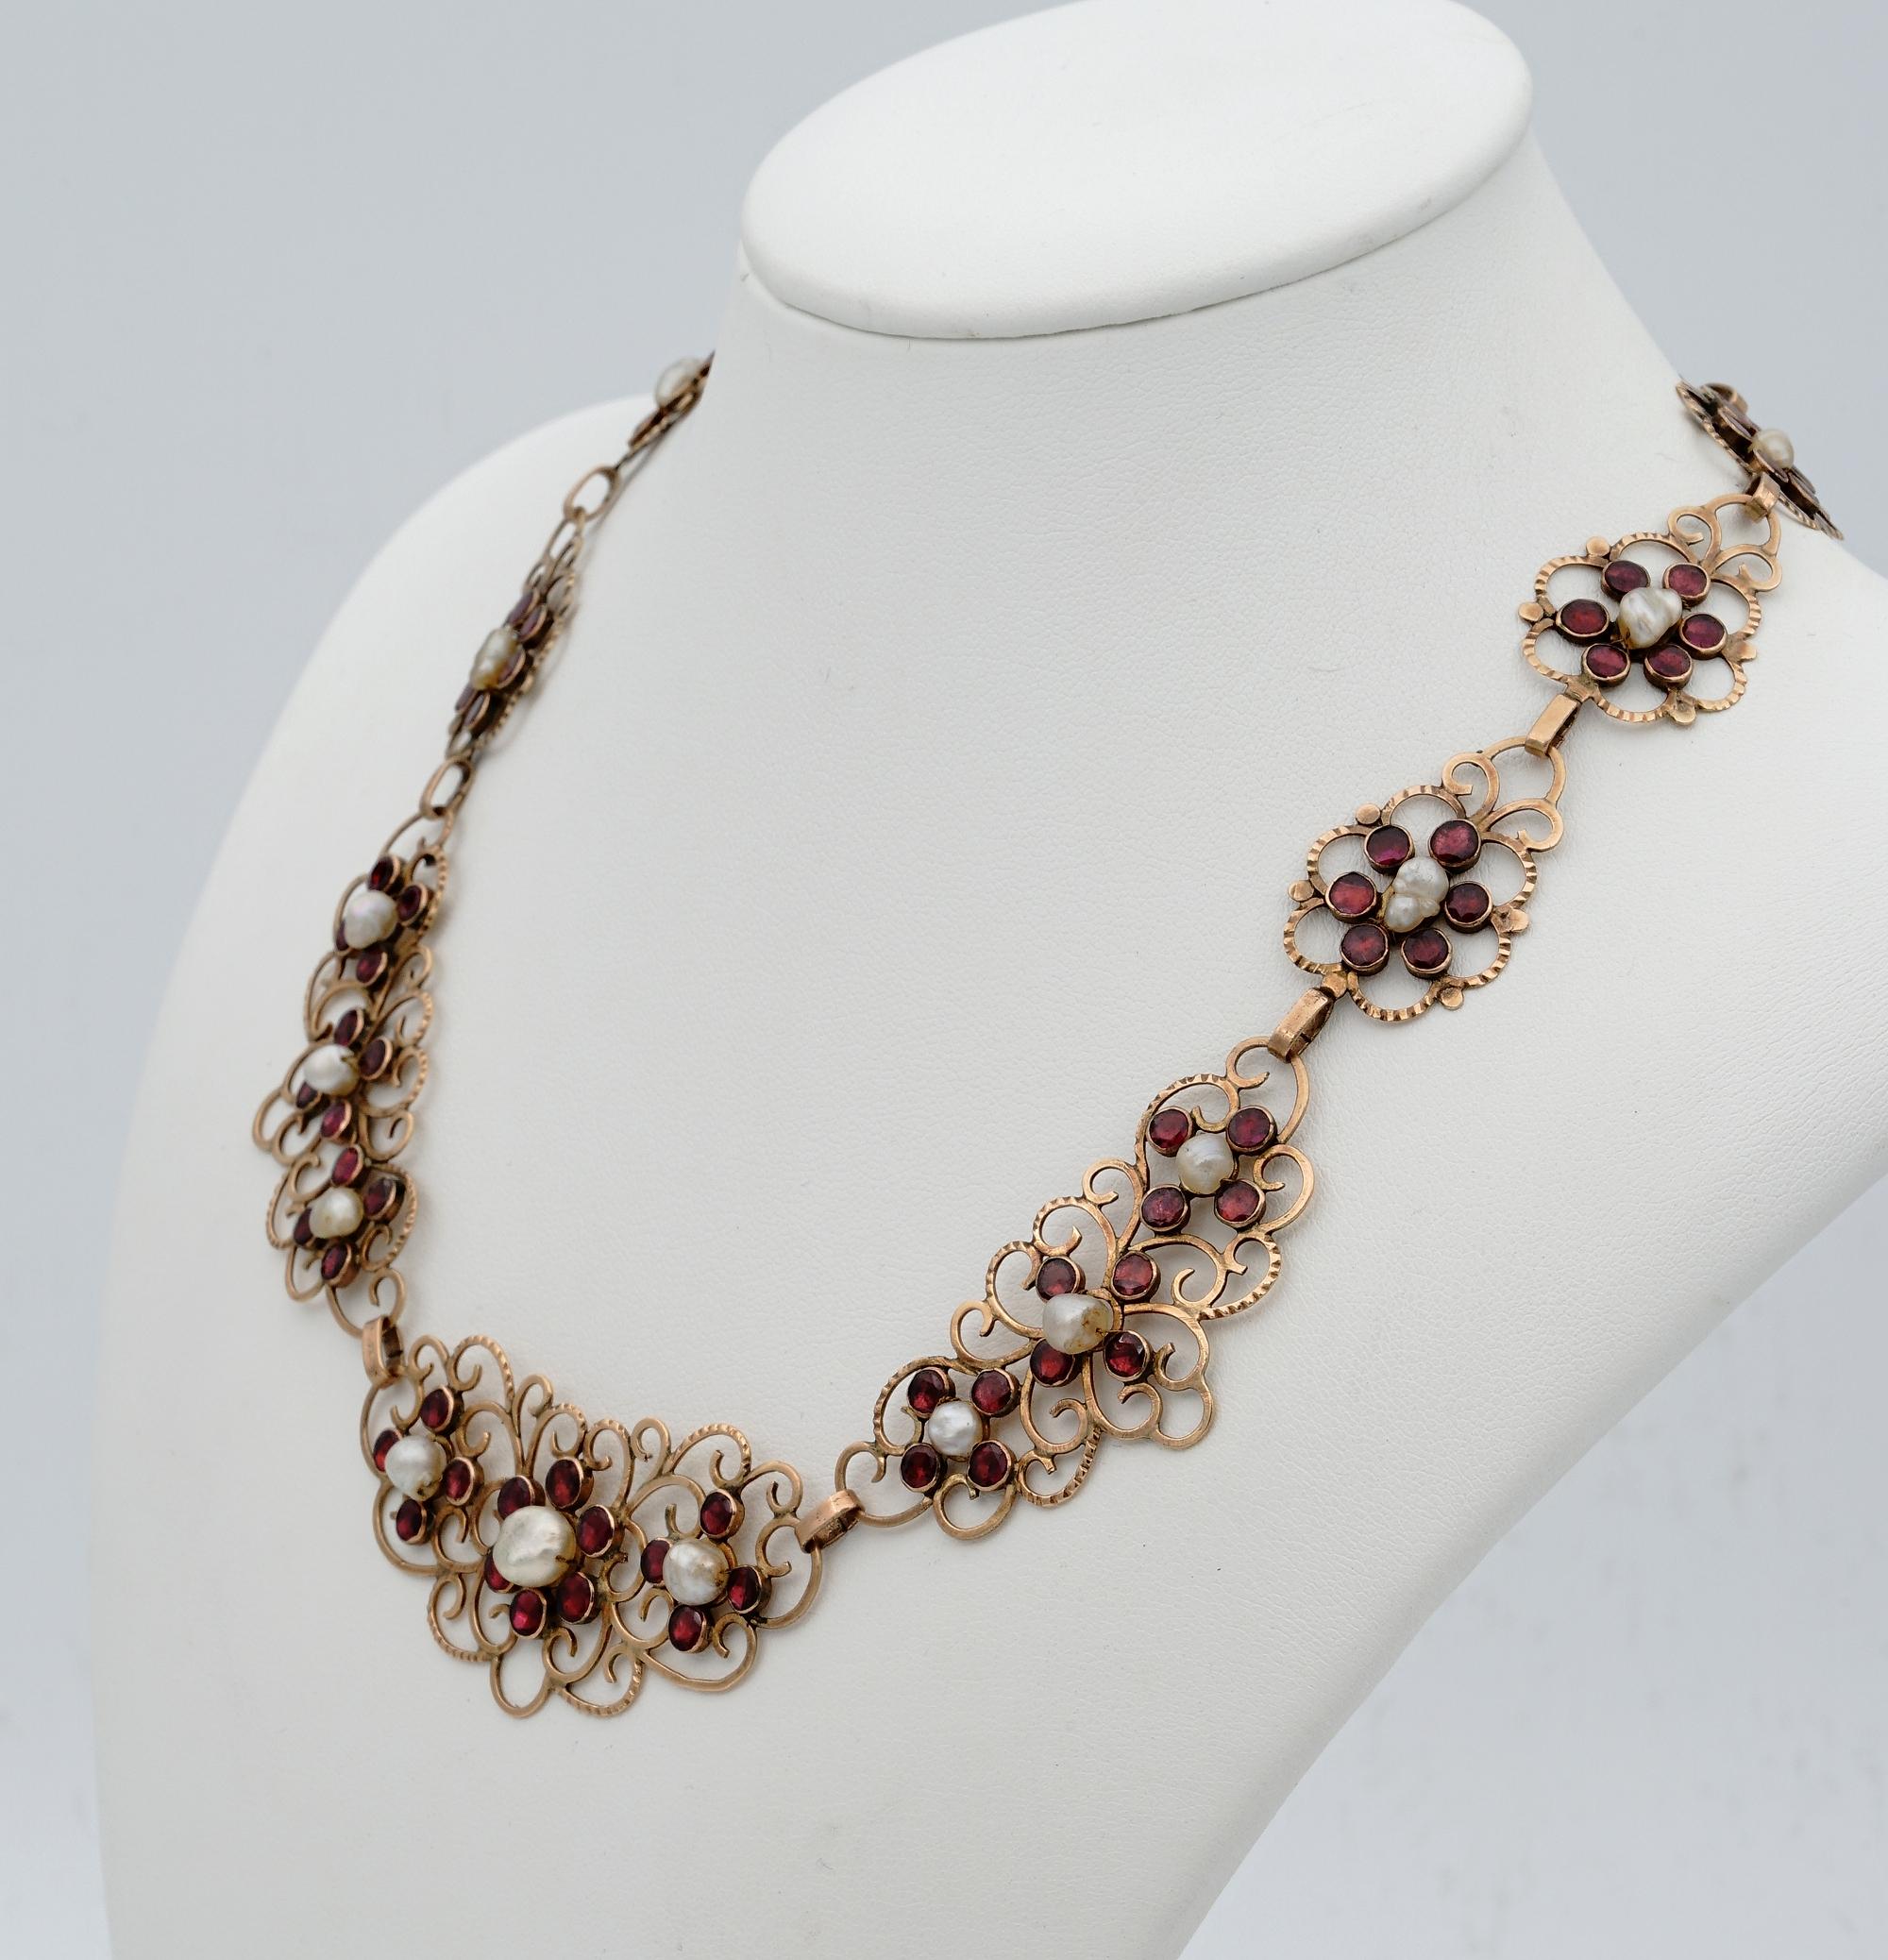 Women's or Men's Rare Georgian Natural Pearl and Red Garnet Necklace For Sale